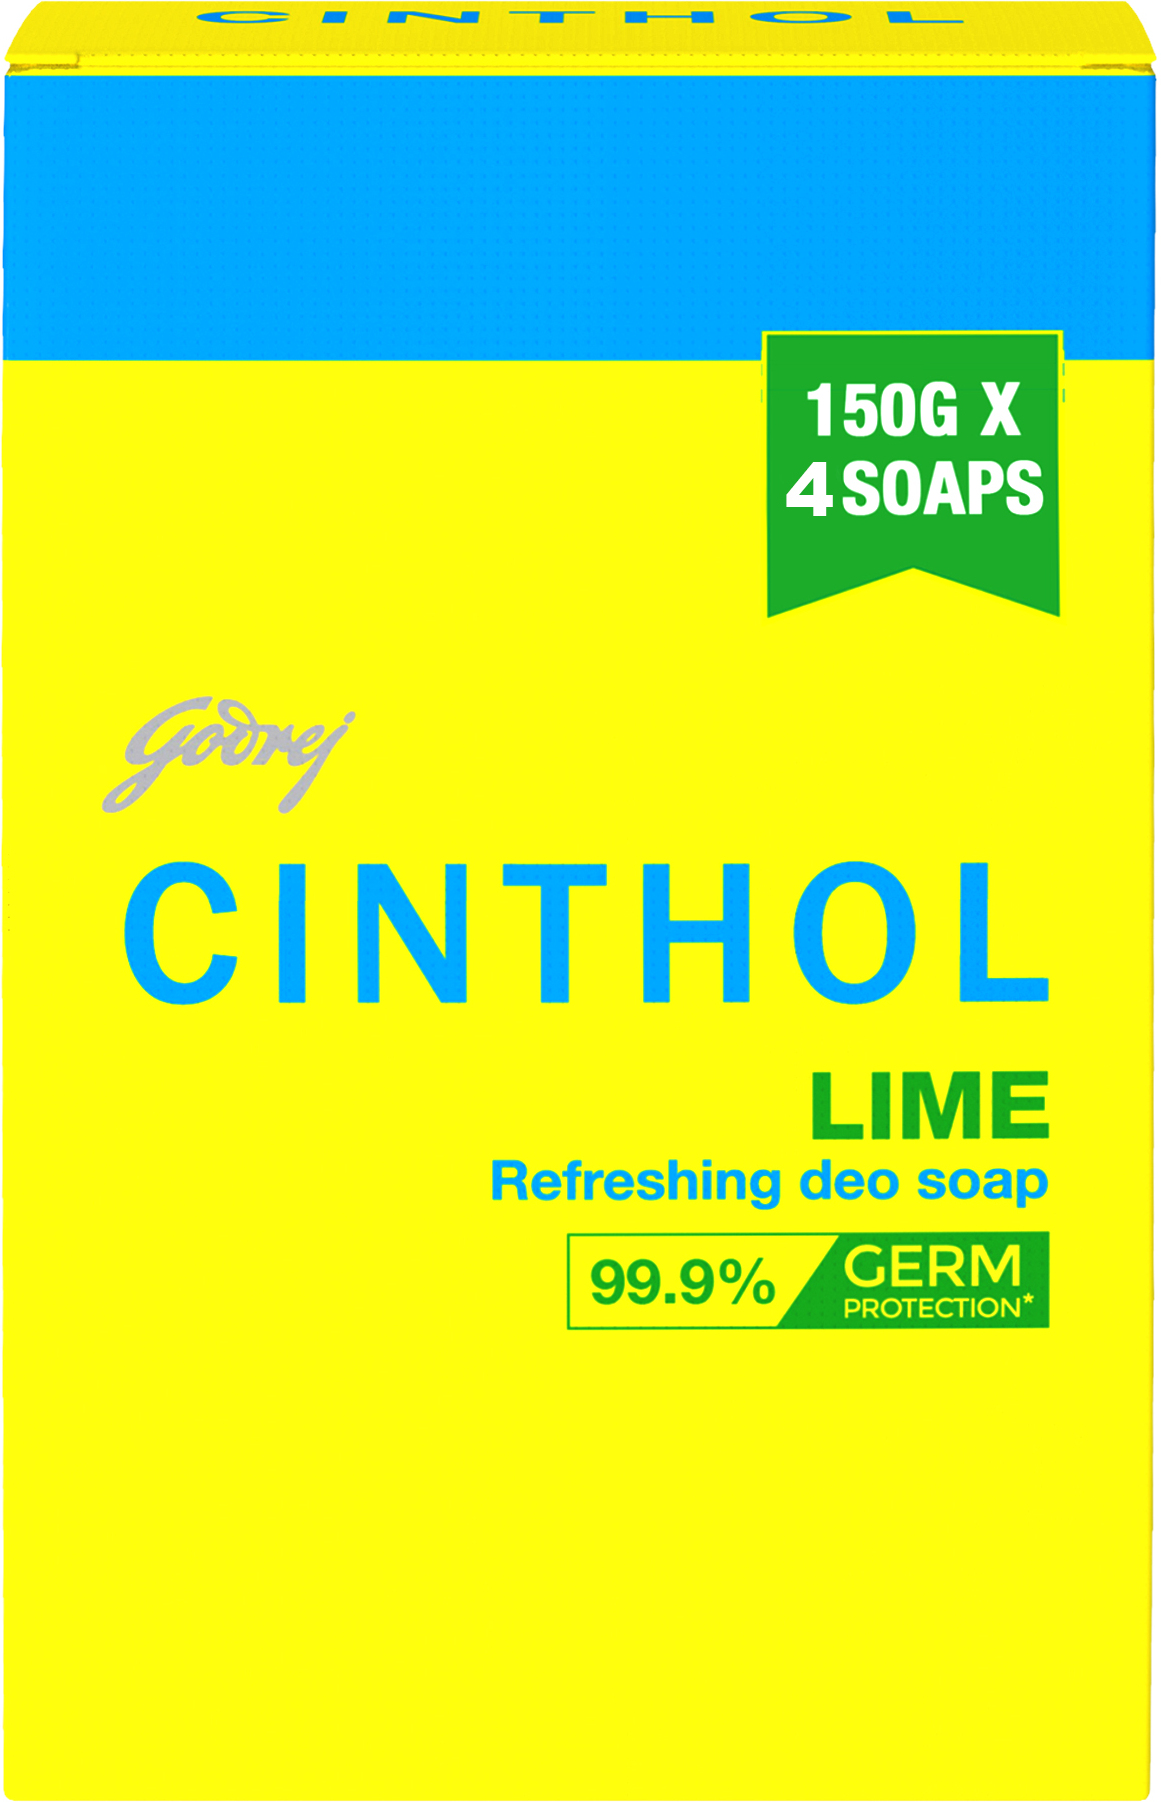 Cinthol Lime Soap 99.9% Germ Protection, Pack of 4